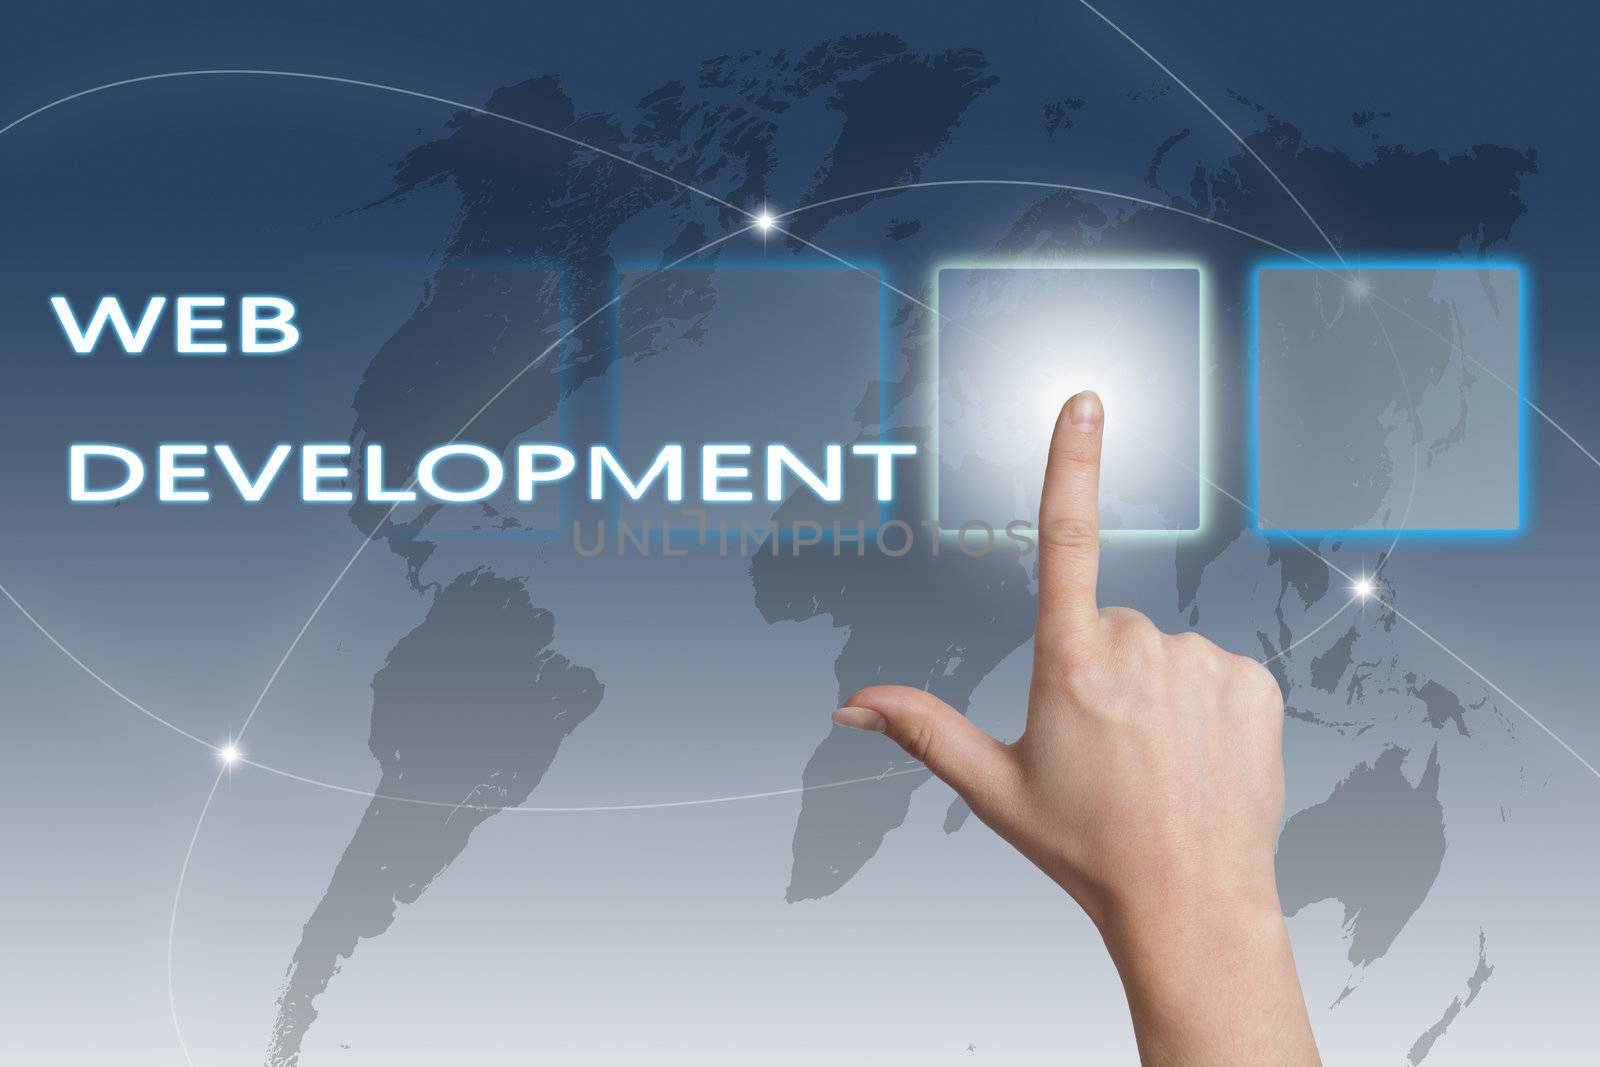 Web Development concept Illustration on blue-white background with world map